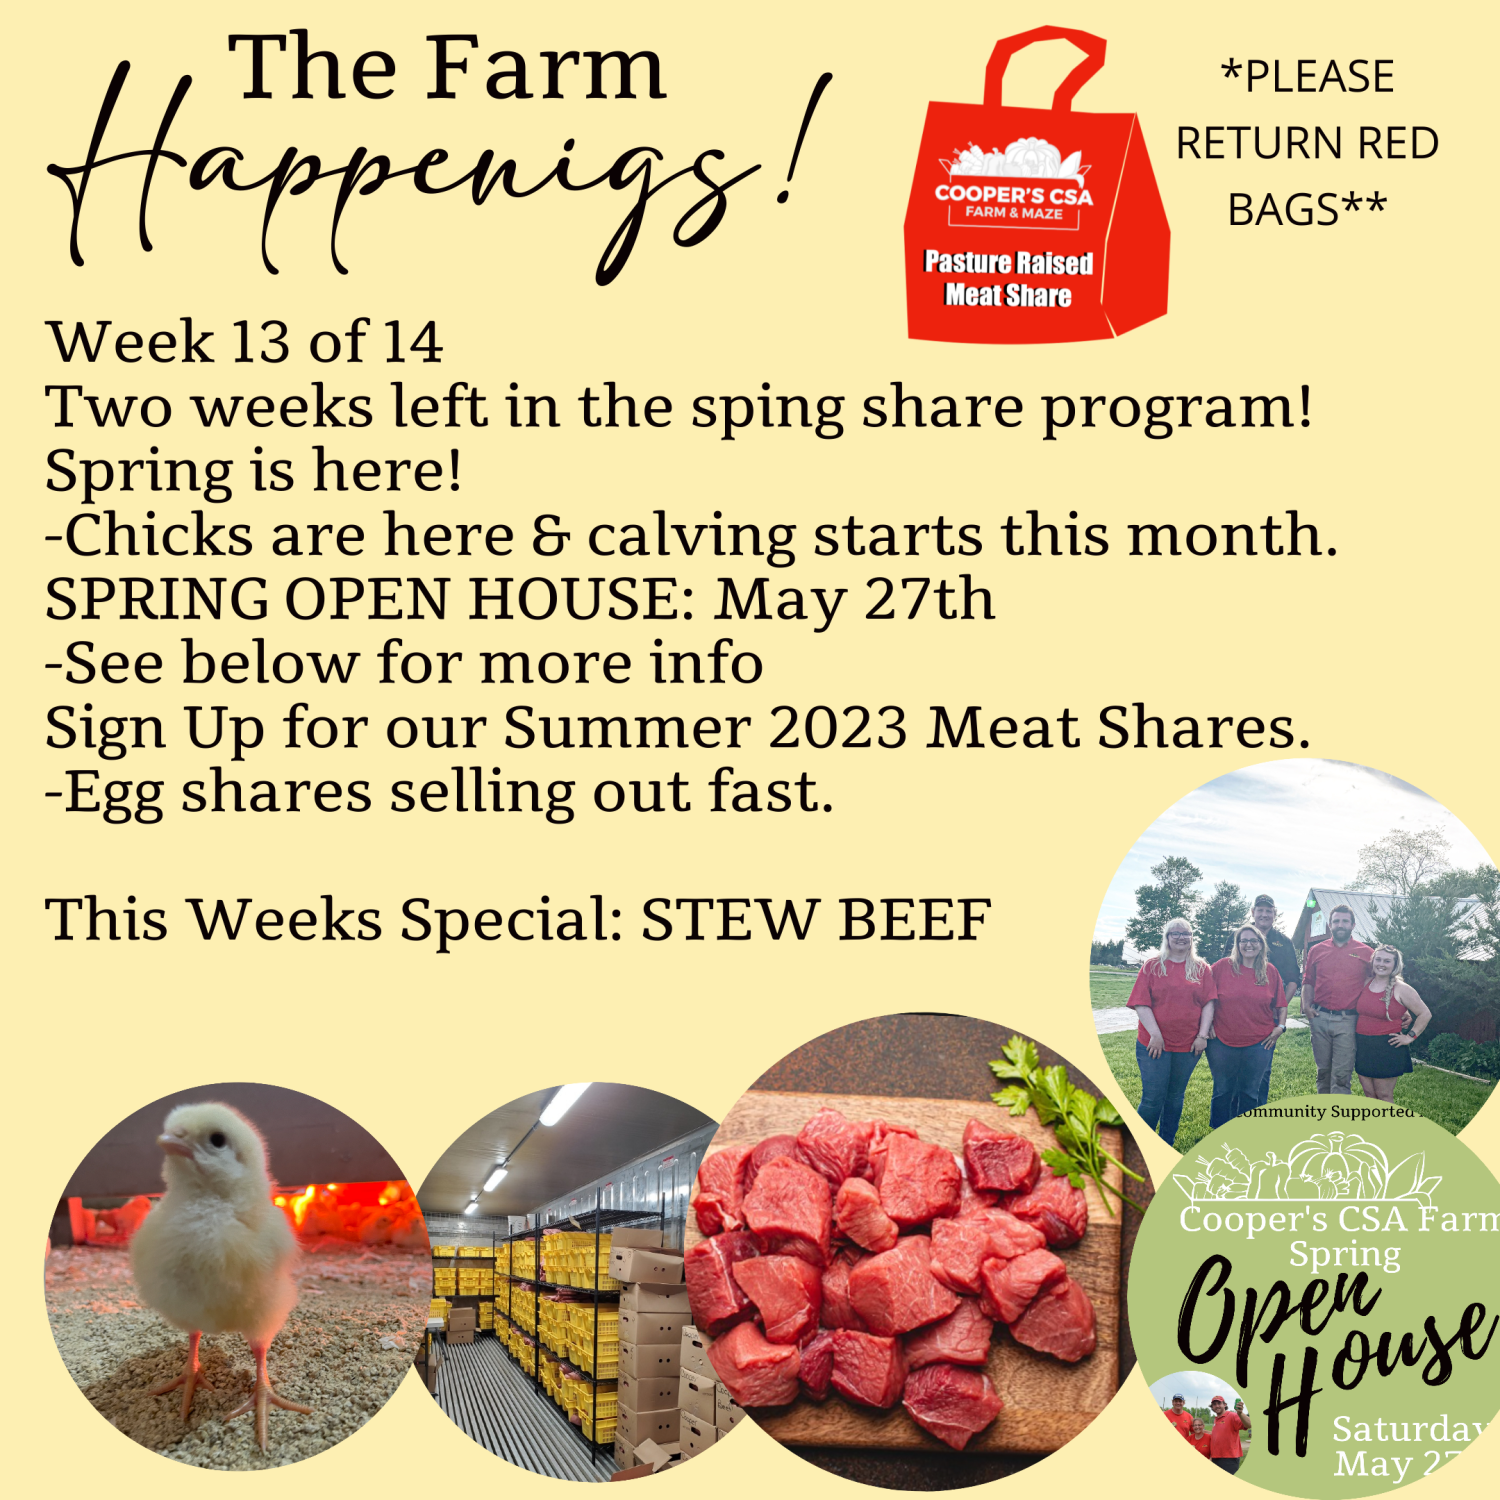 Previous Happening: "Pasture Meat Shares"-Coopers CSA Farm Farm Happenings Week 13